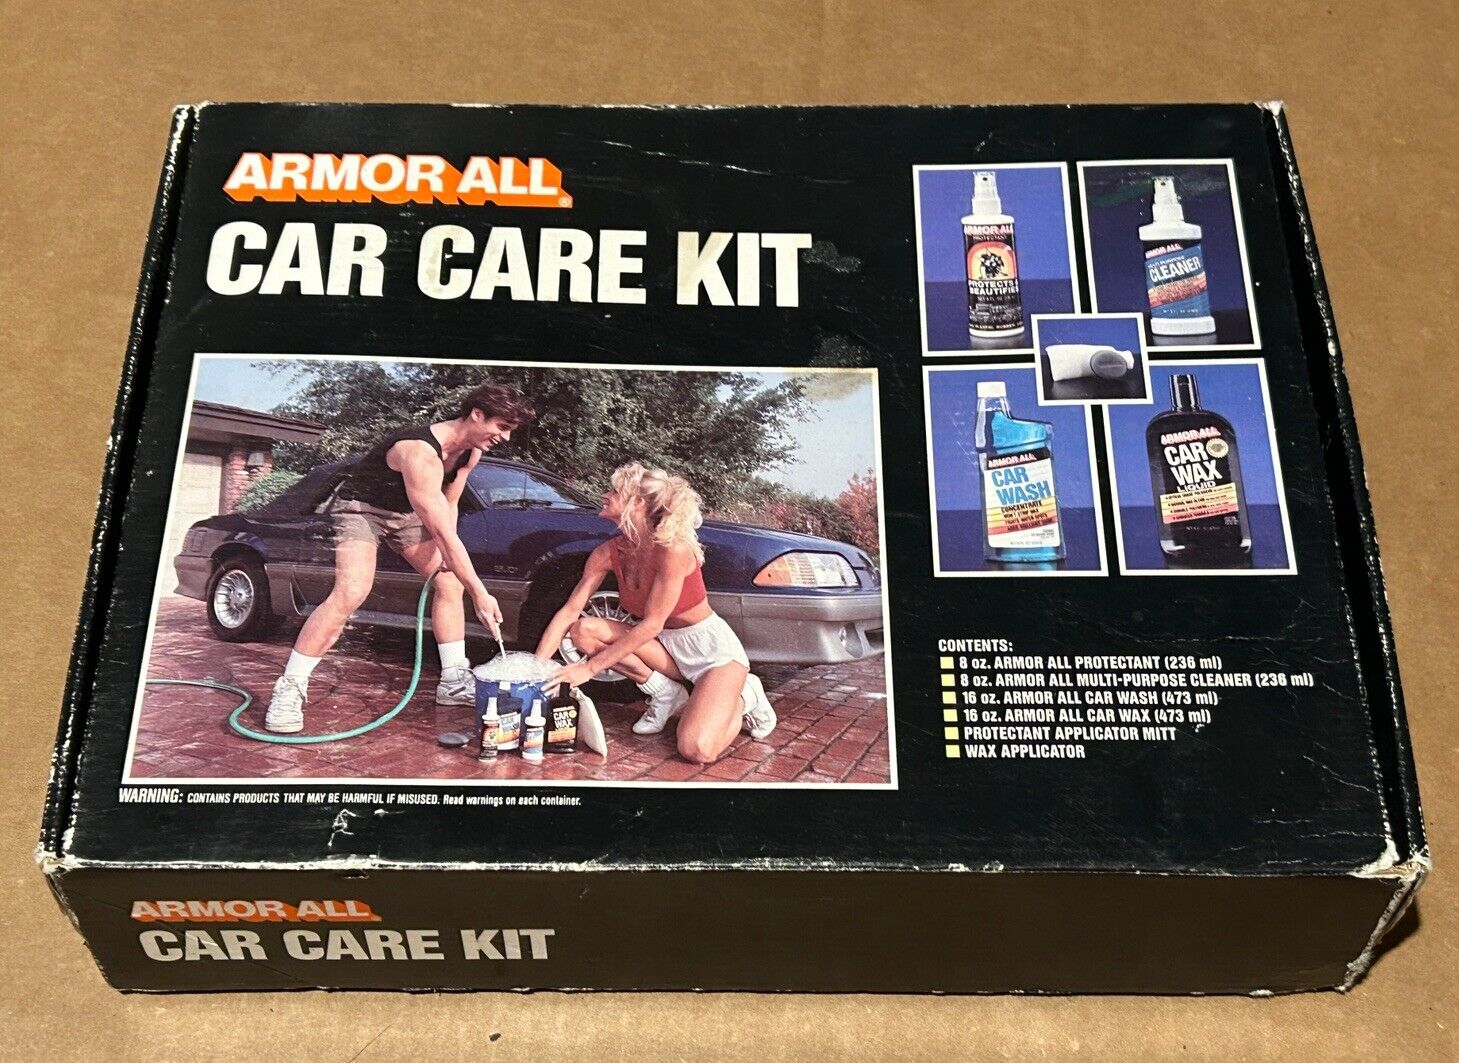 Vintage Armor All Car Care Kit 1991 Featuring 1987 Ford Mustang 5.0 on Box